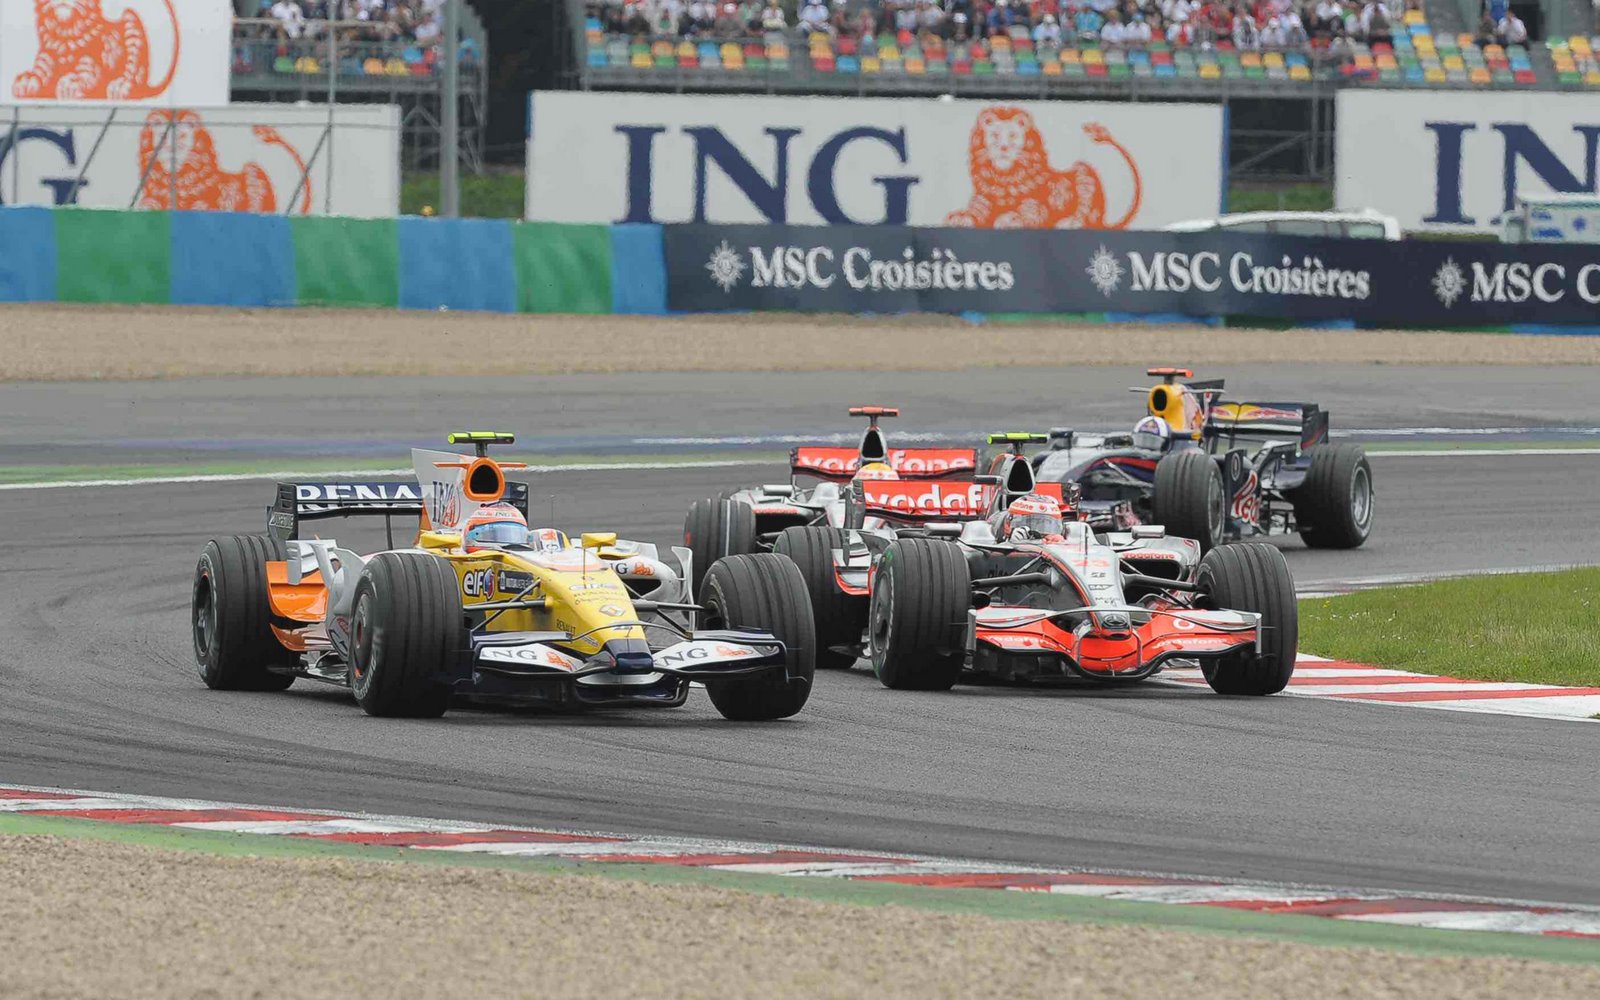 [Sunday+Race+in+France+Magny+Cours,+F1+2008+94.jpg]